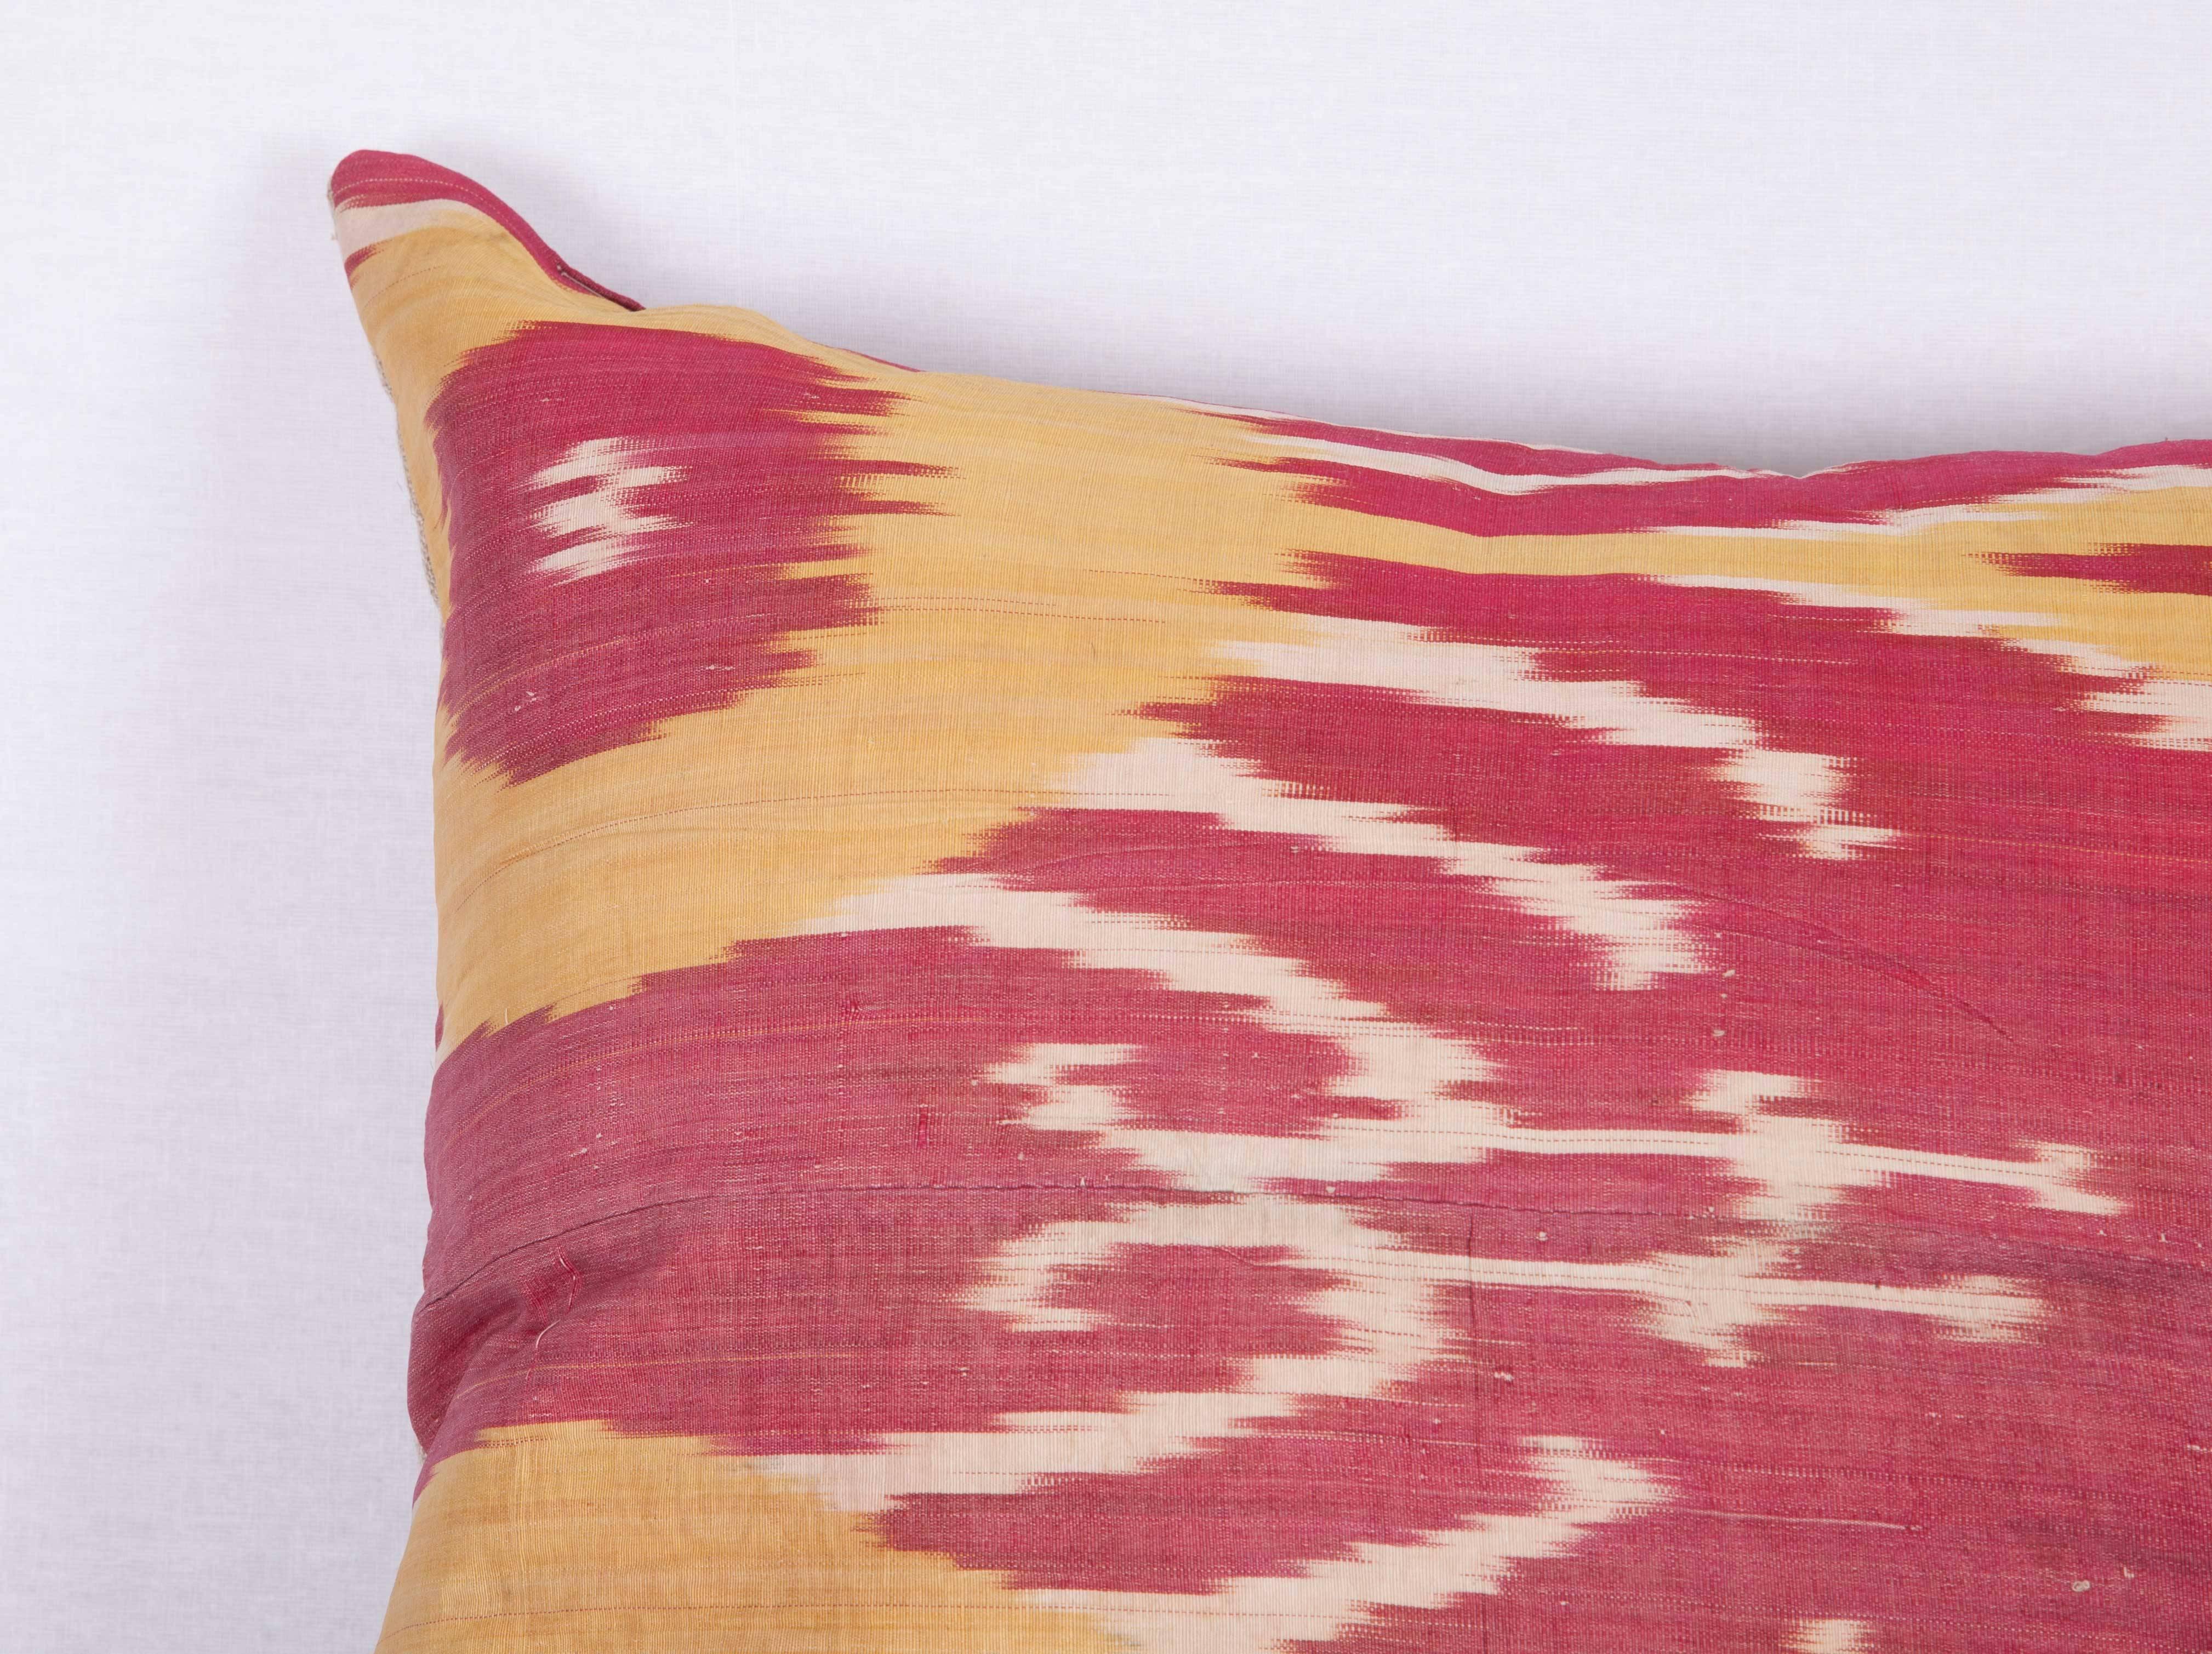 The pillow is made out of late 19th century, Uzbek ikat. It does not come with an insert but it comes with a bag made to the size and out of cotton to accommodate the filling. The backing is made of linen. Please note 'filling is not provided'.